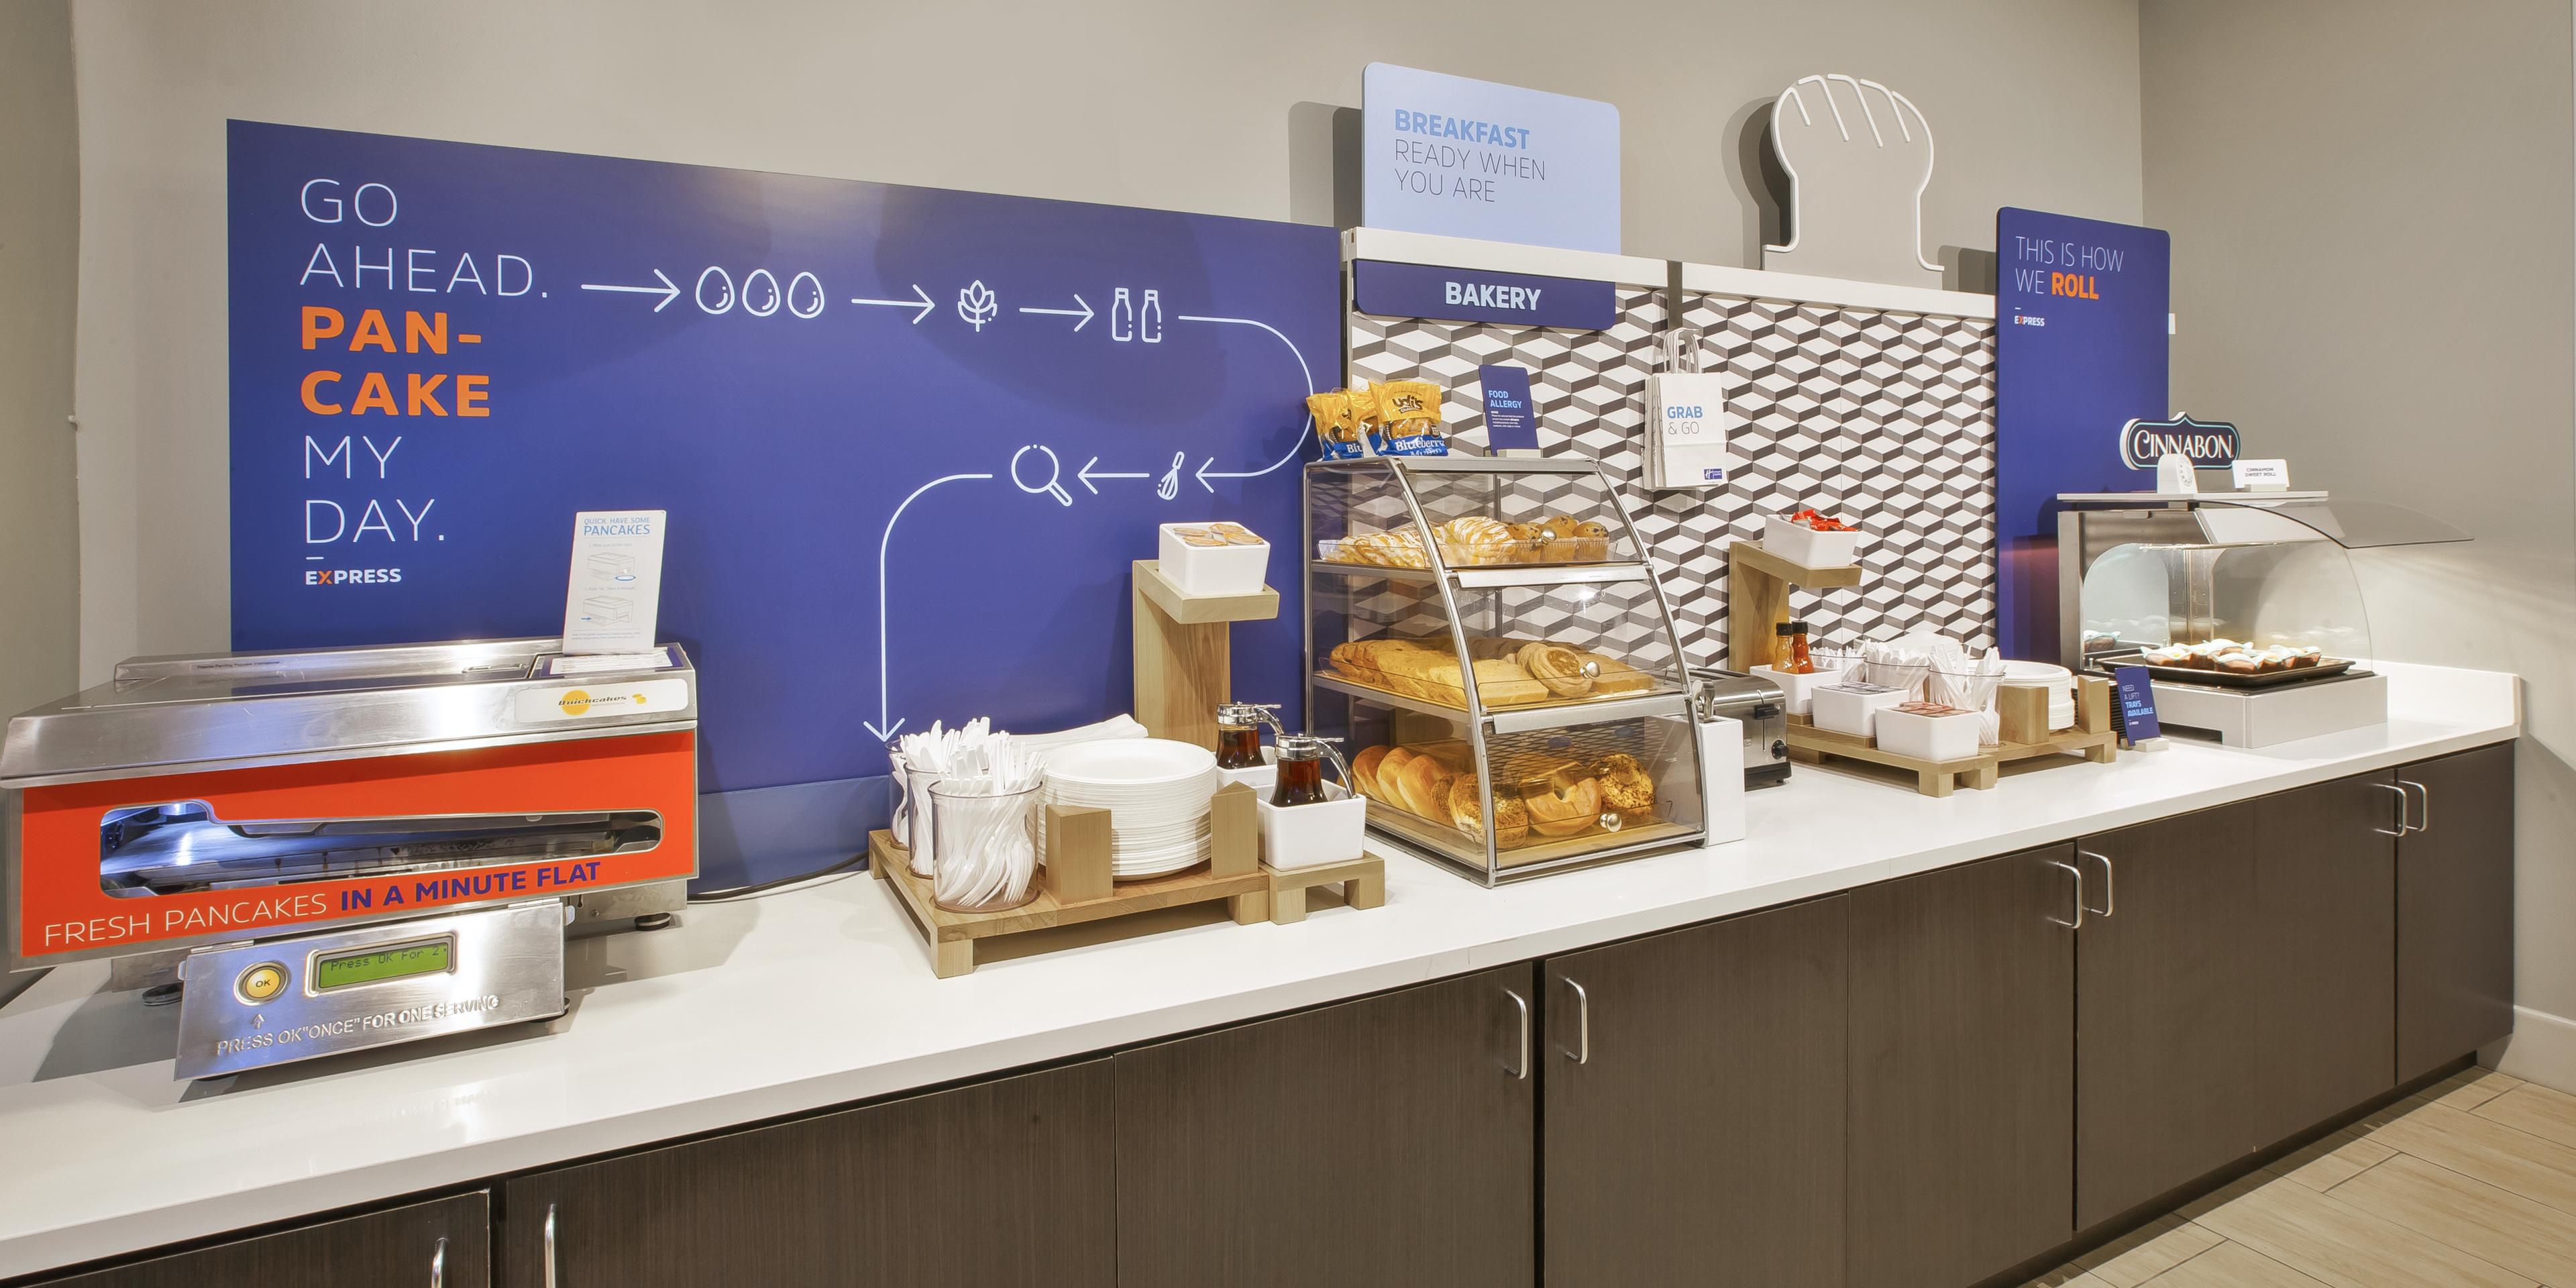 You can be sure to start your morning right with fresh hot breakfast in our lobby. Our hotel features a complimentary "Express Start" hot breakfast buffet that includes eggs, waffles, cinnamon rolls, and freshly brewed coffee.